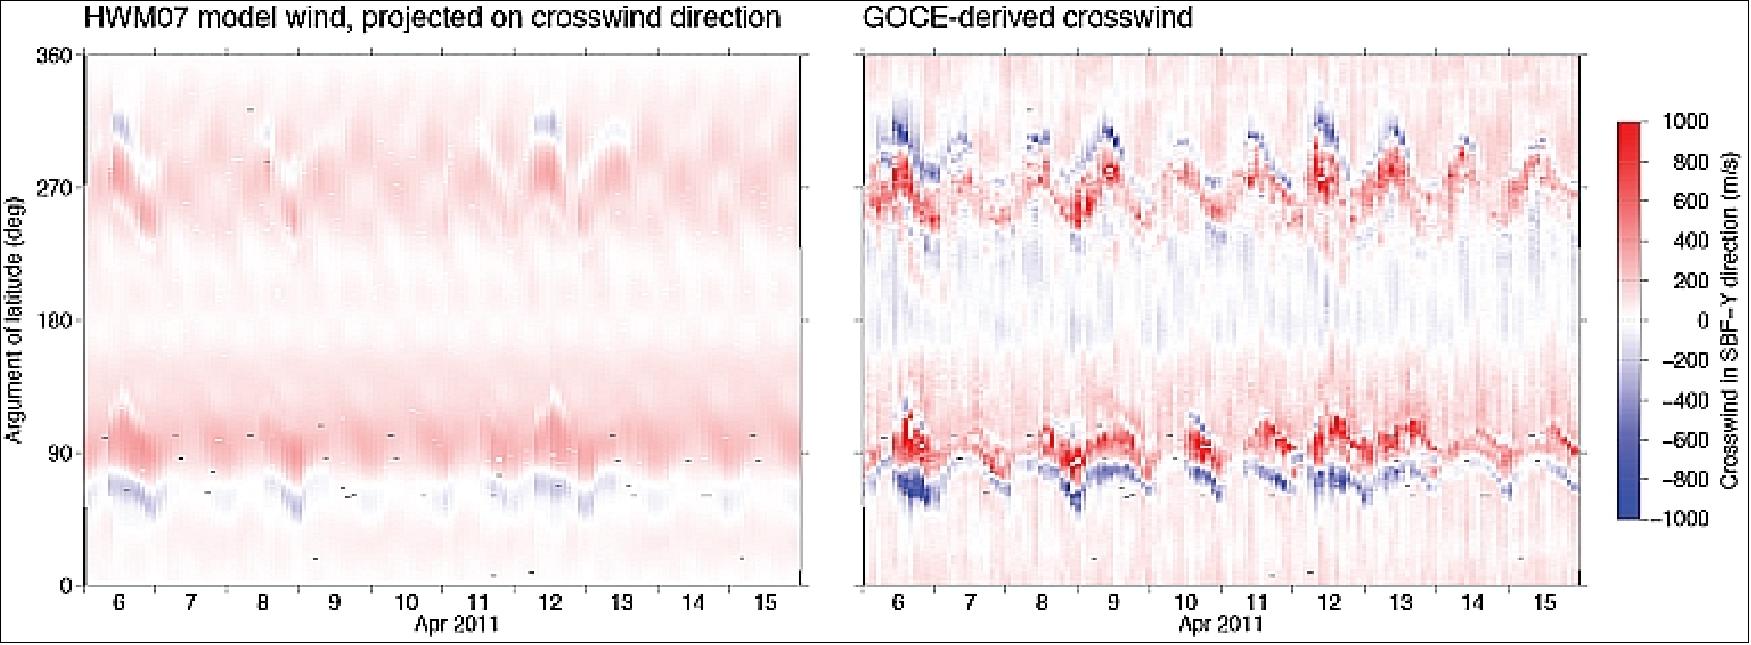 Figure 47: Crosswinds in space from ESA's GOCE gravity mission (right) compared to model predictions (left), image credit: TU Delft, ESA